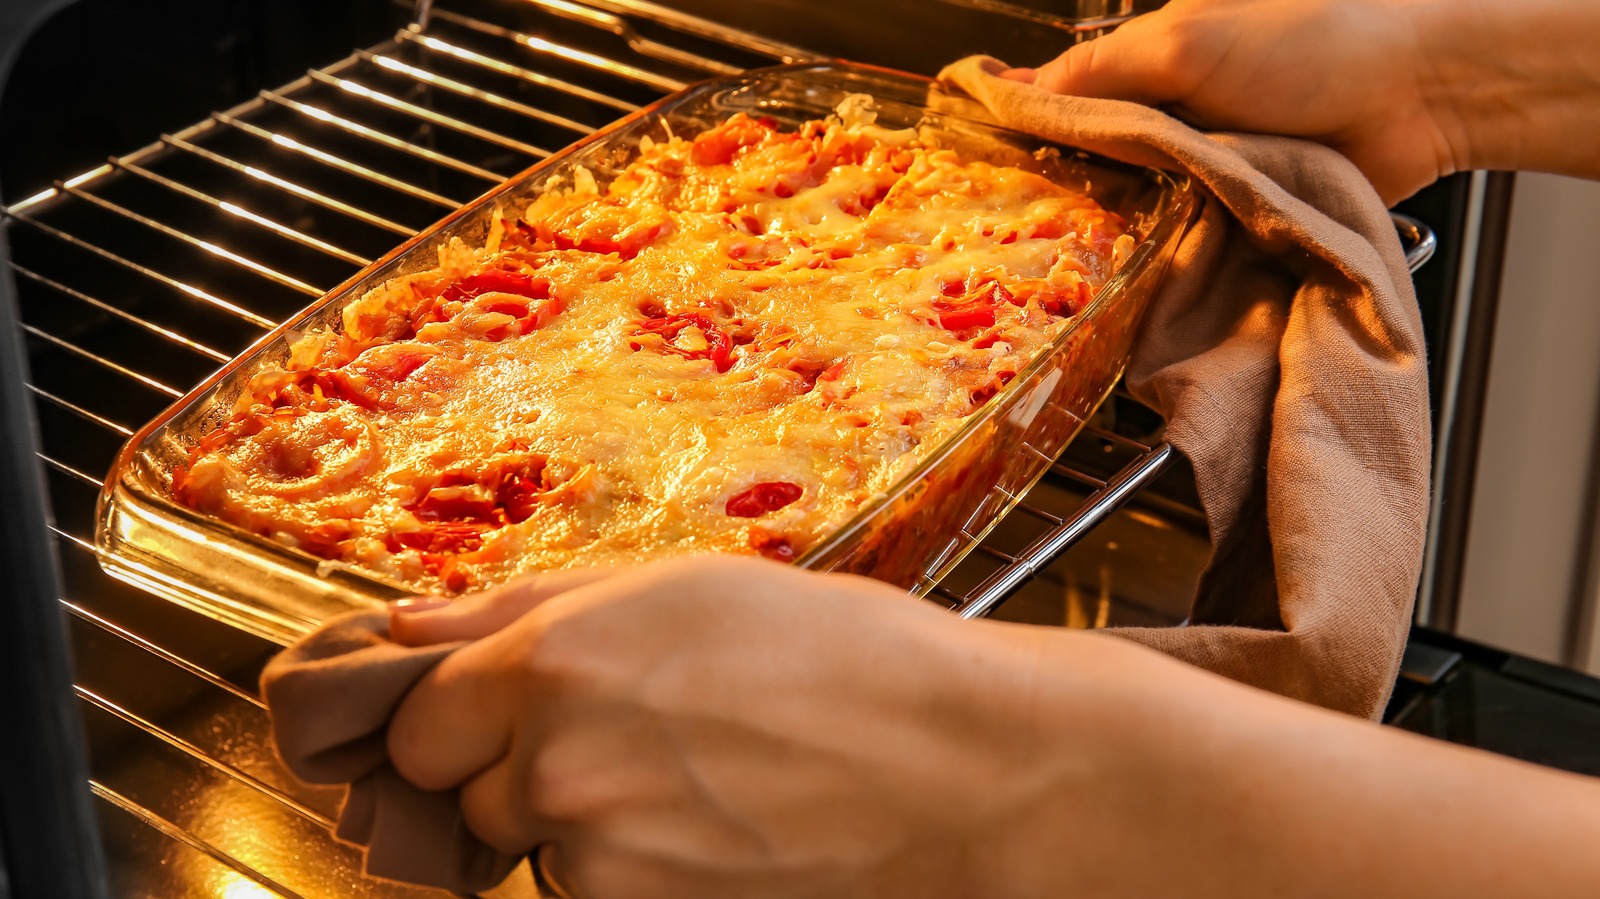 Baking pans are made of metal, and baking dishes are made of glass